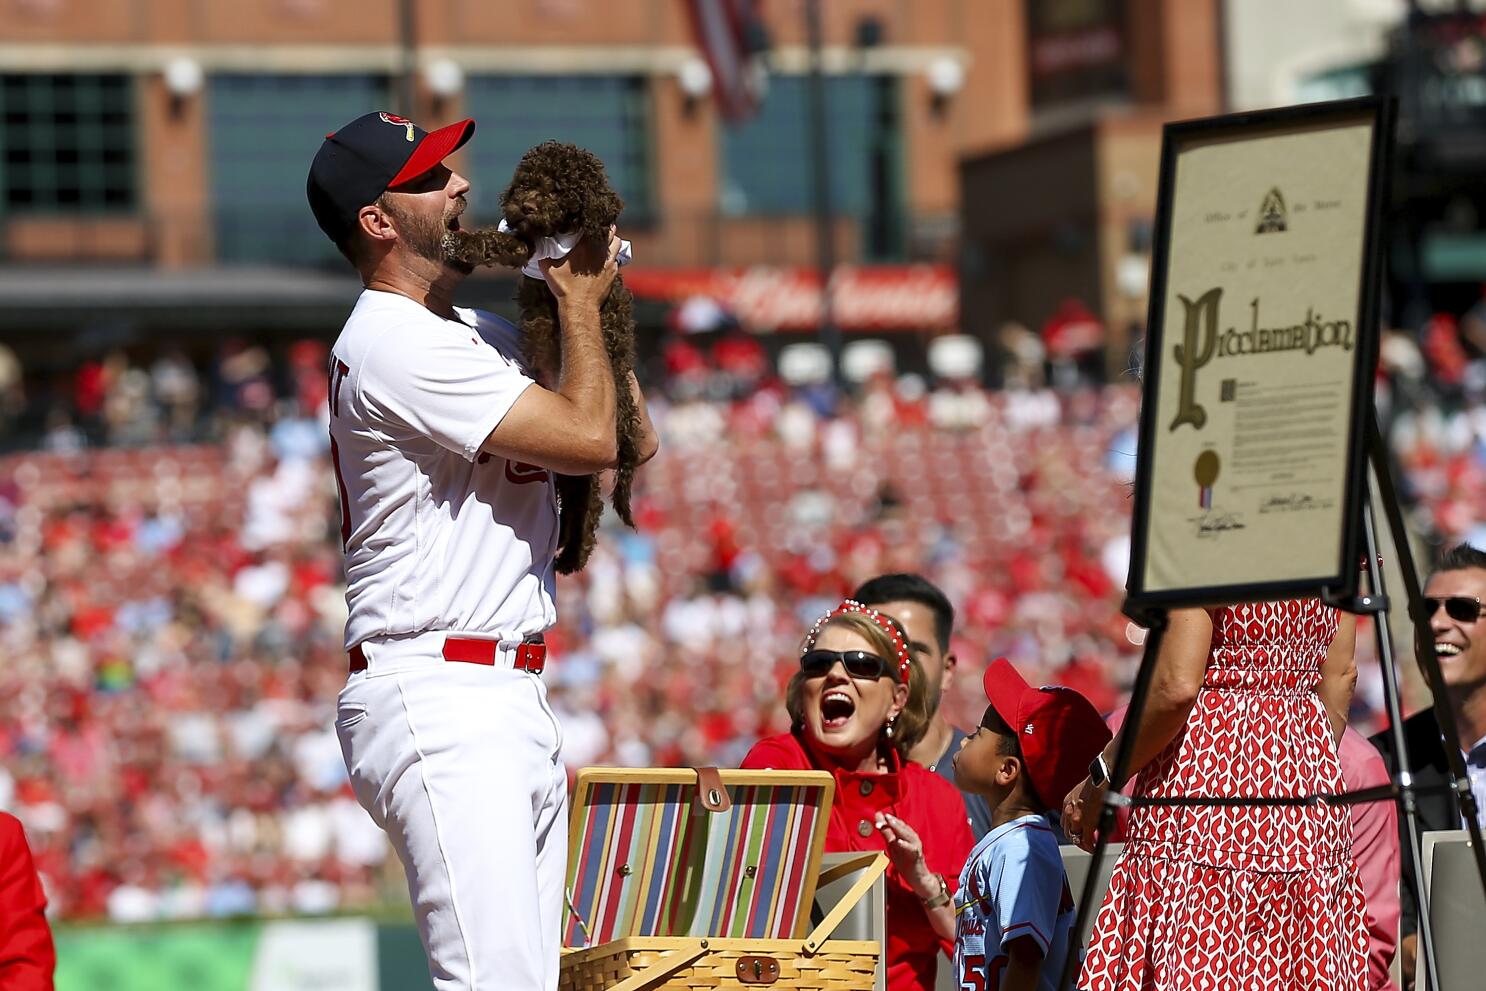 Adam Wainwright promised his kids a puppy when he retired. Cardinals  delivered on final day - The San Diego Union-Tribune